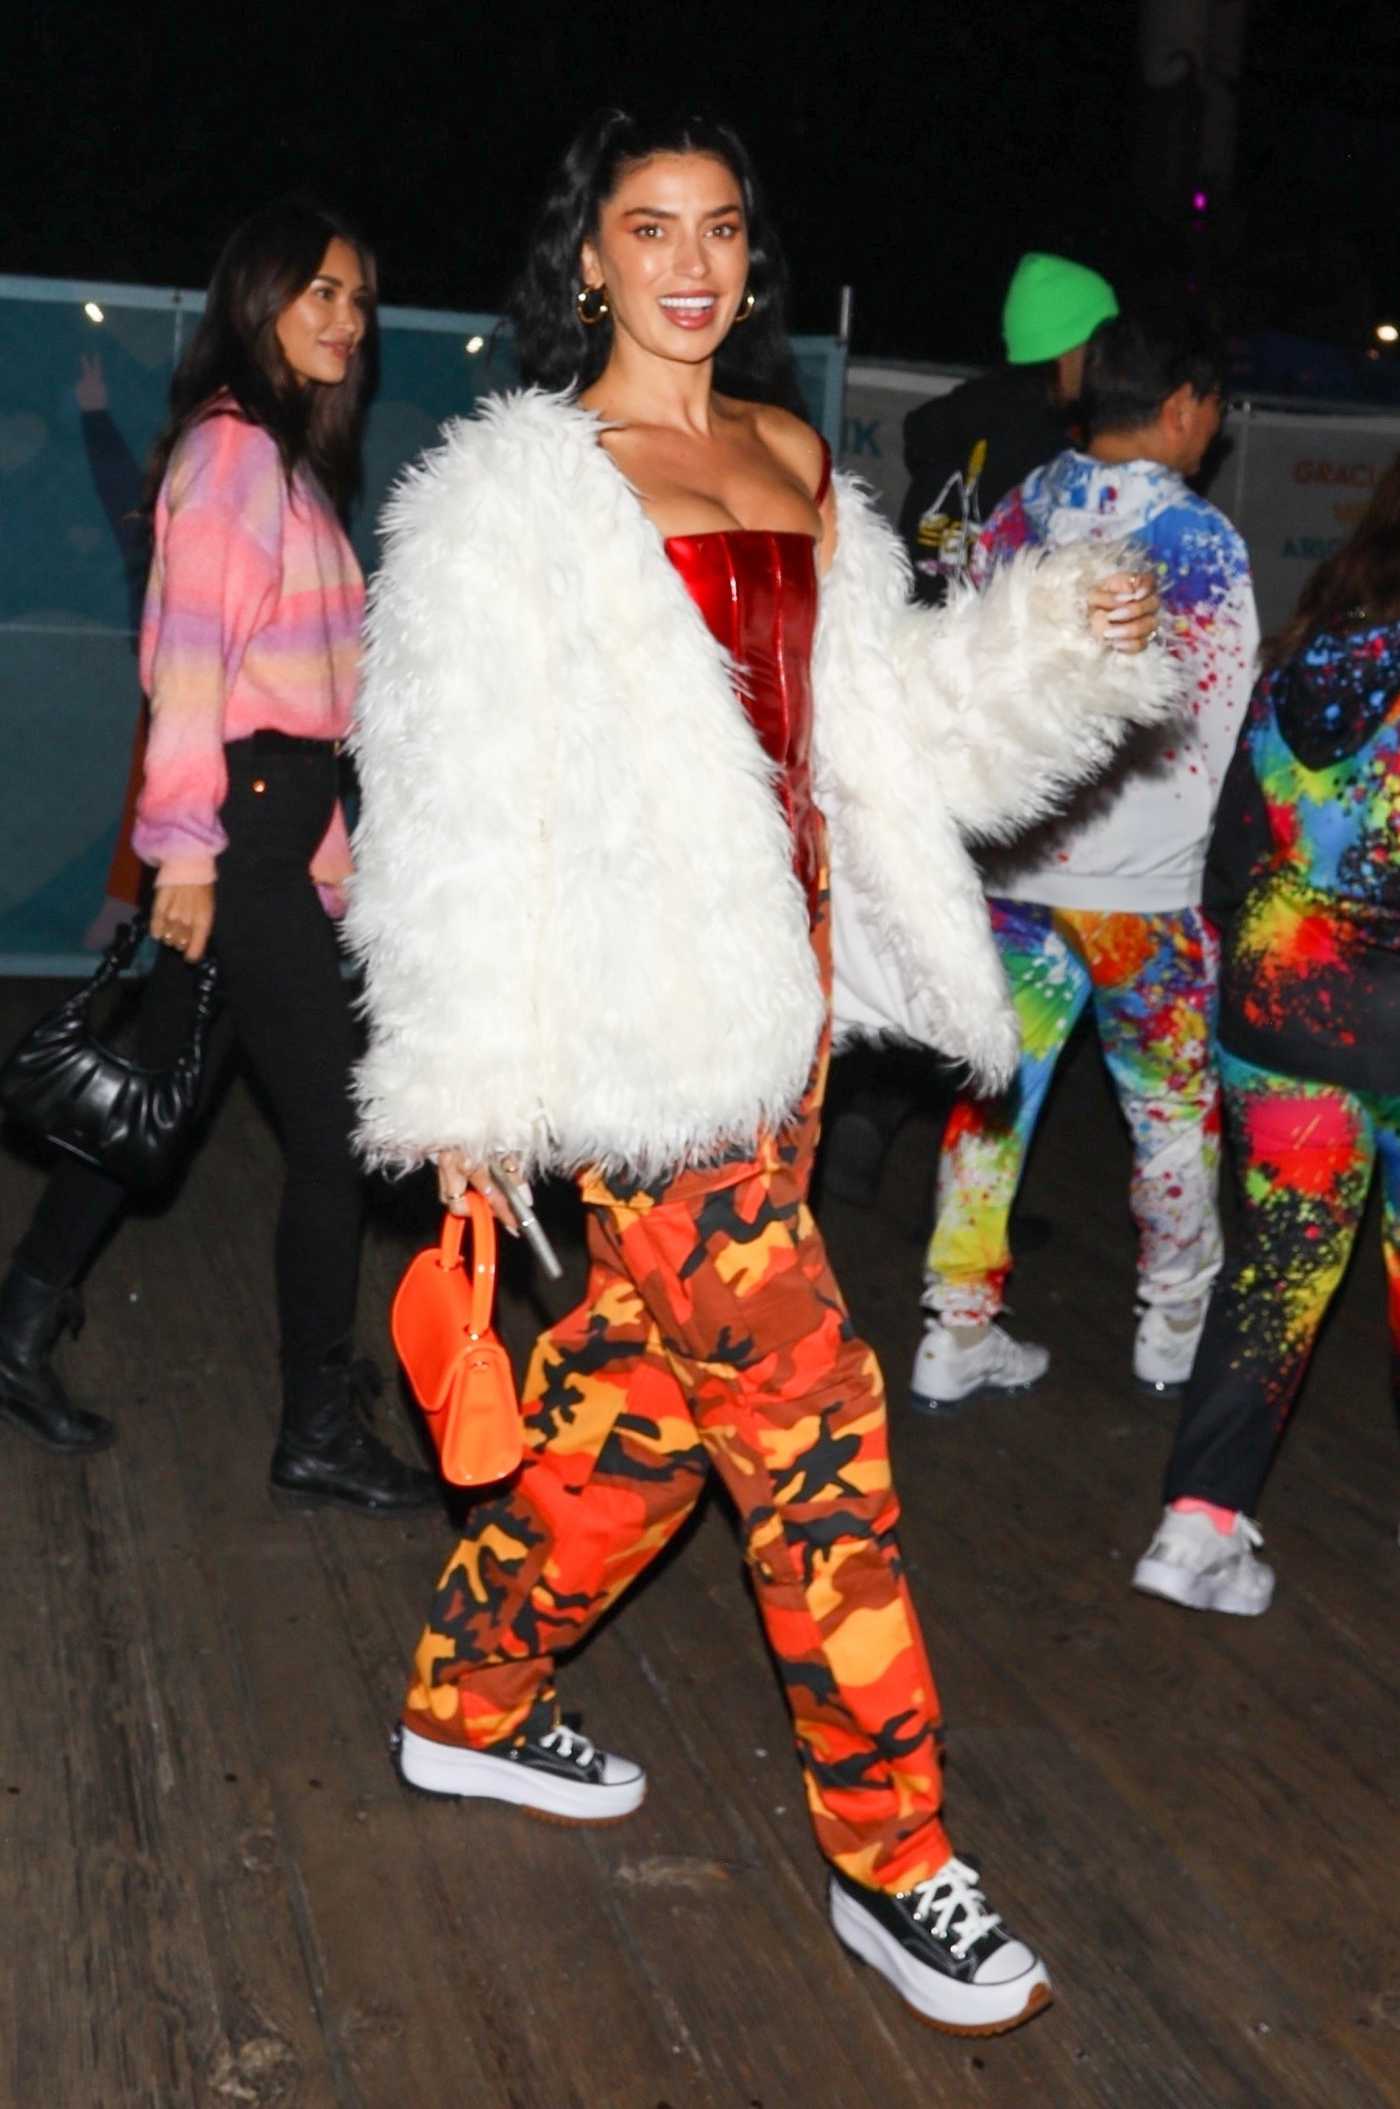 Nicole Williams in an Orange Camo Pants Arrives for Paris Hilton and Carter Reum’s Wedding After-Party at the Santa Monica Pier in Santa Monica 11/12/2021